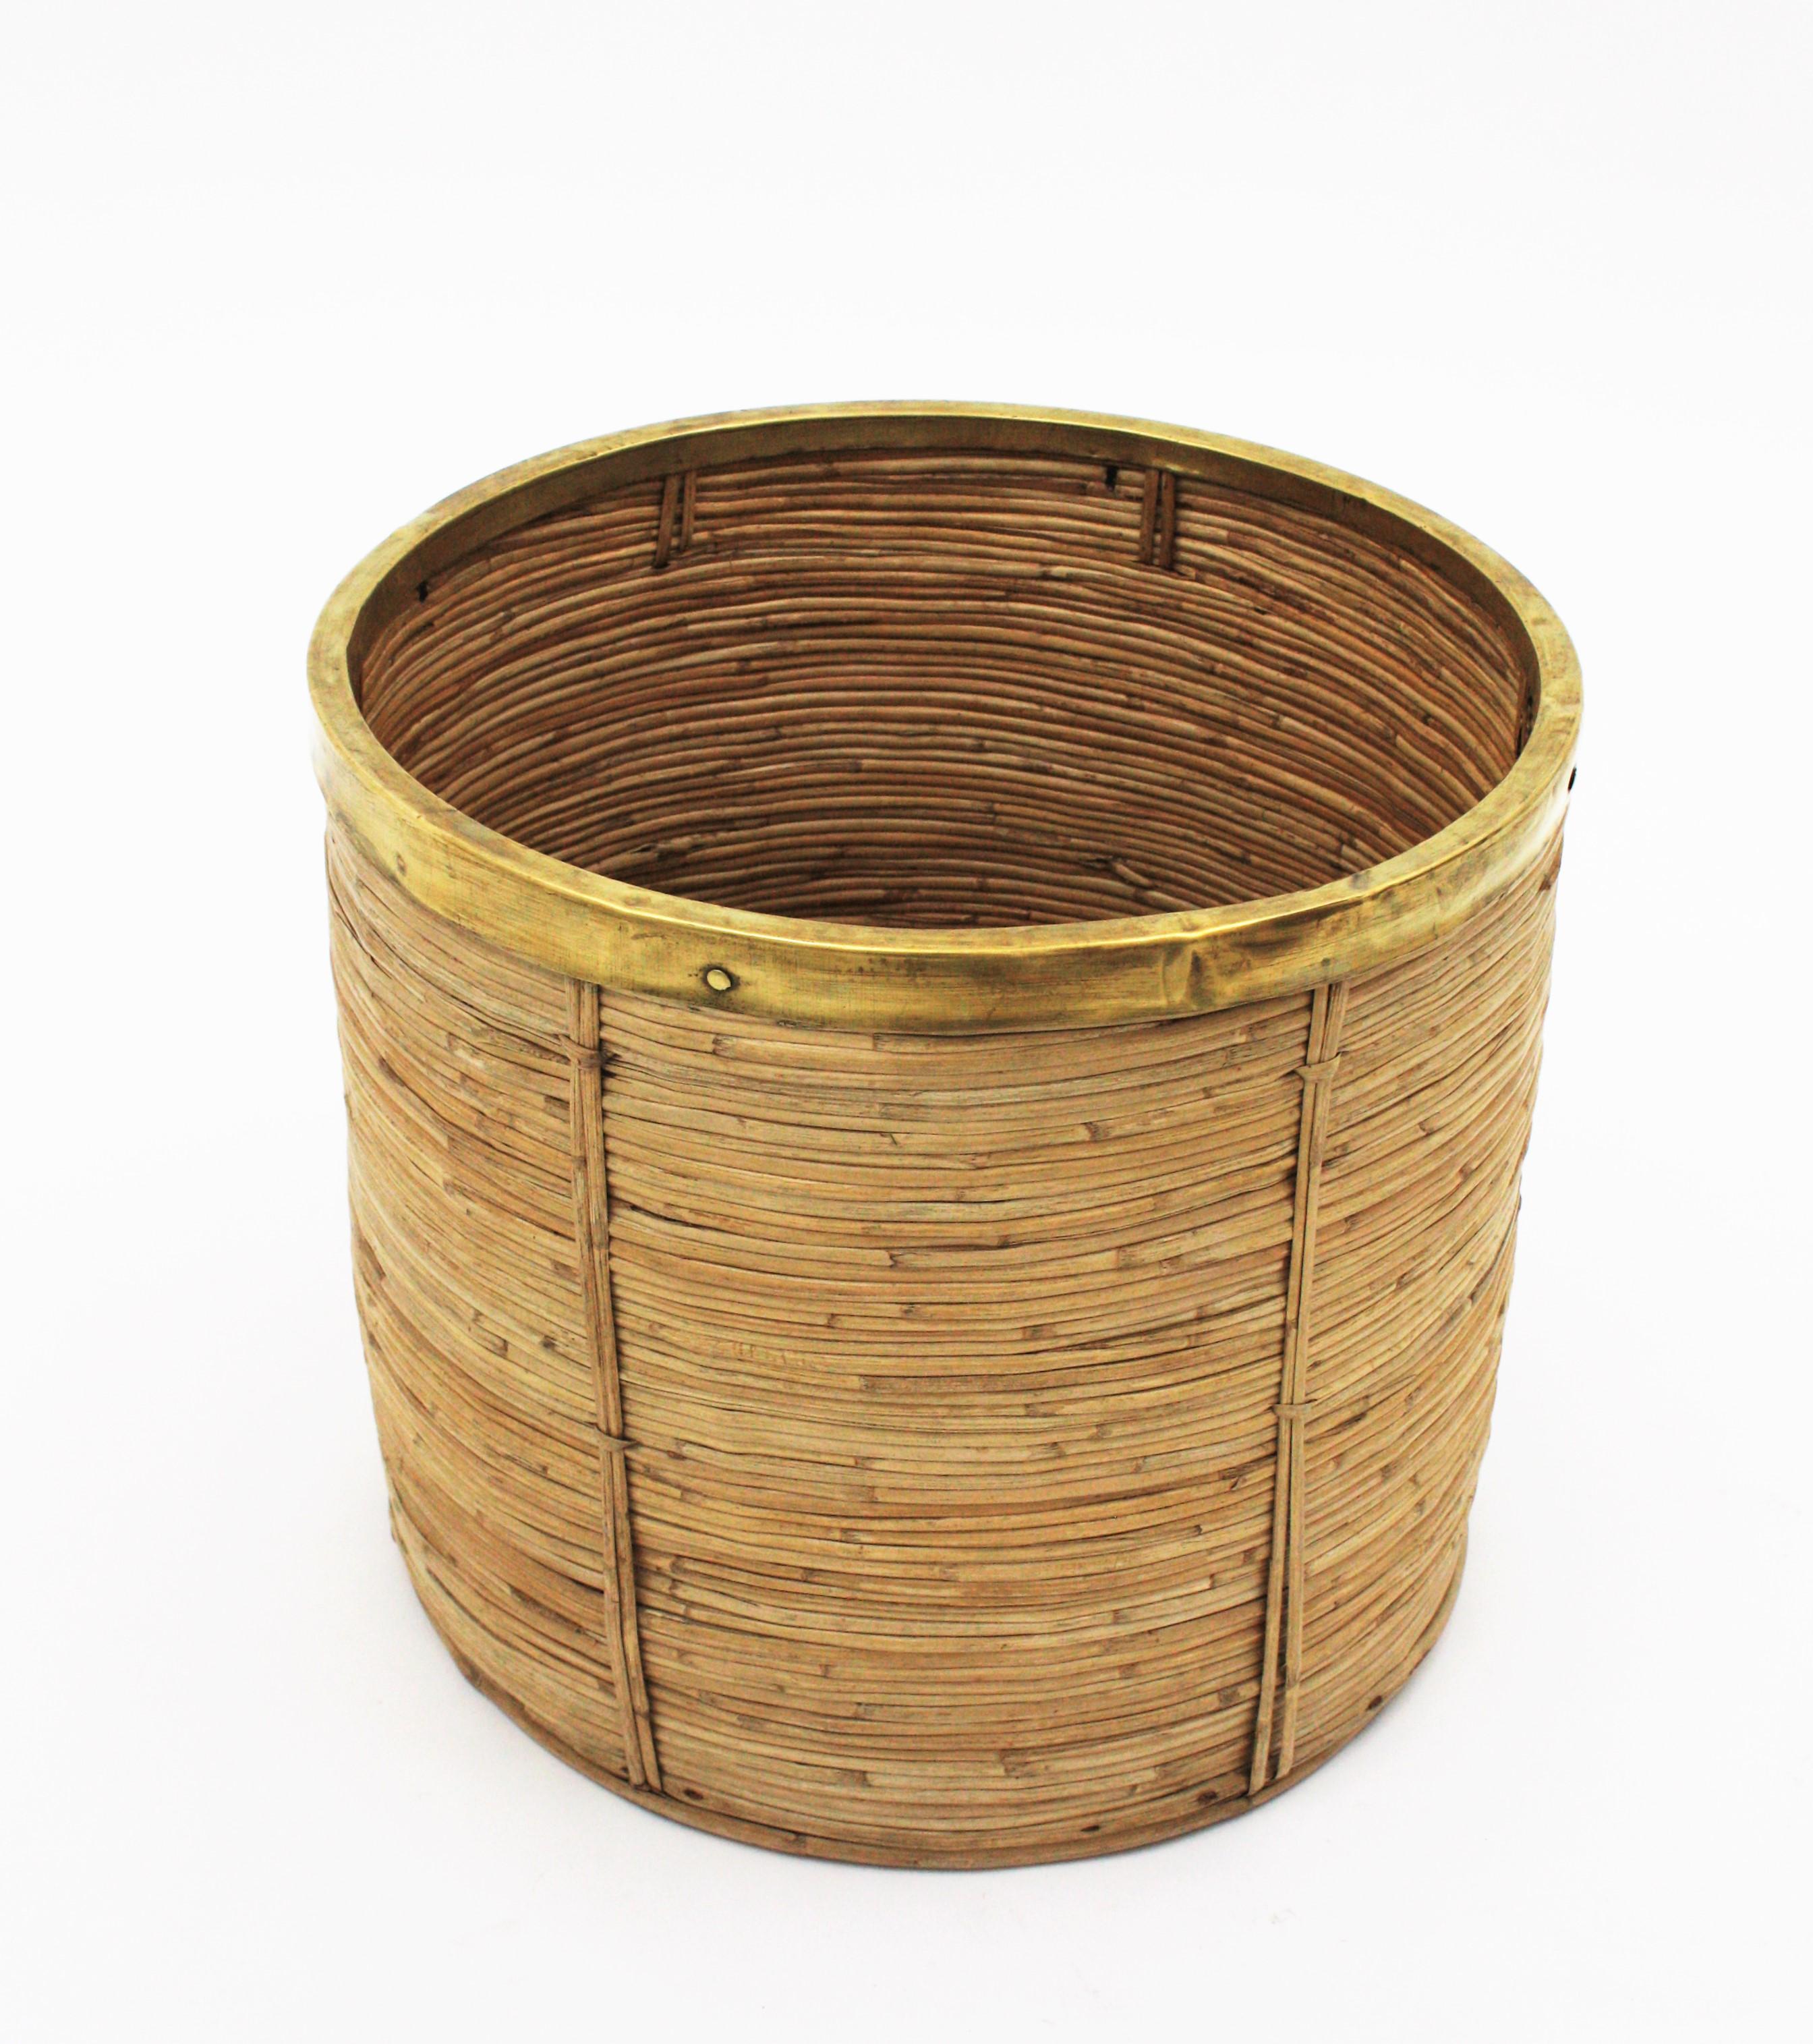 Large Rattan Bamboo Round Planter with Brass Rim, Italy, 1970s For Sale 6